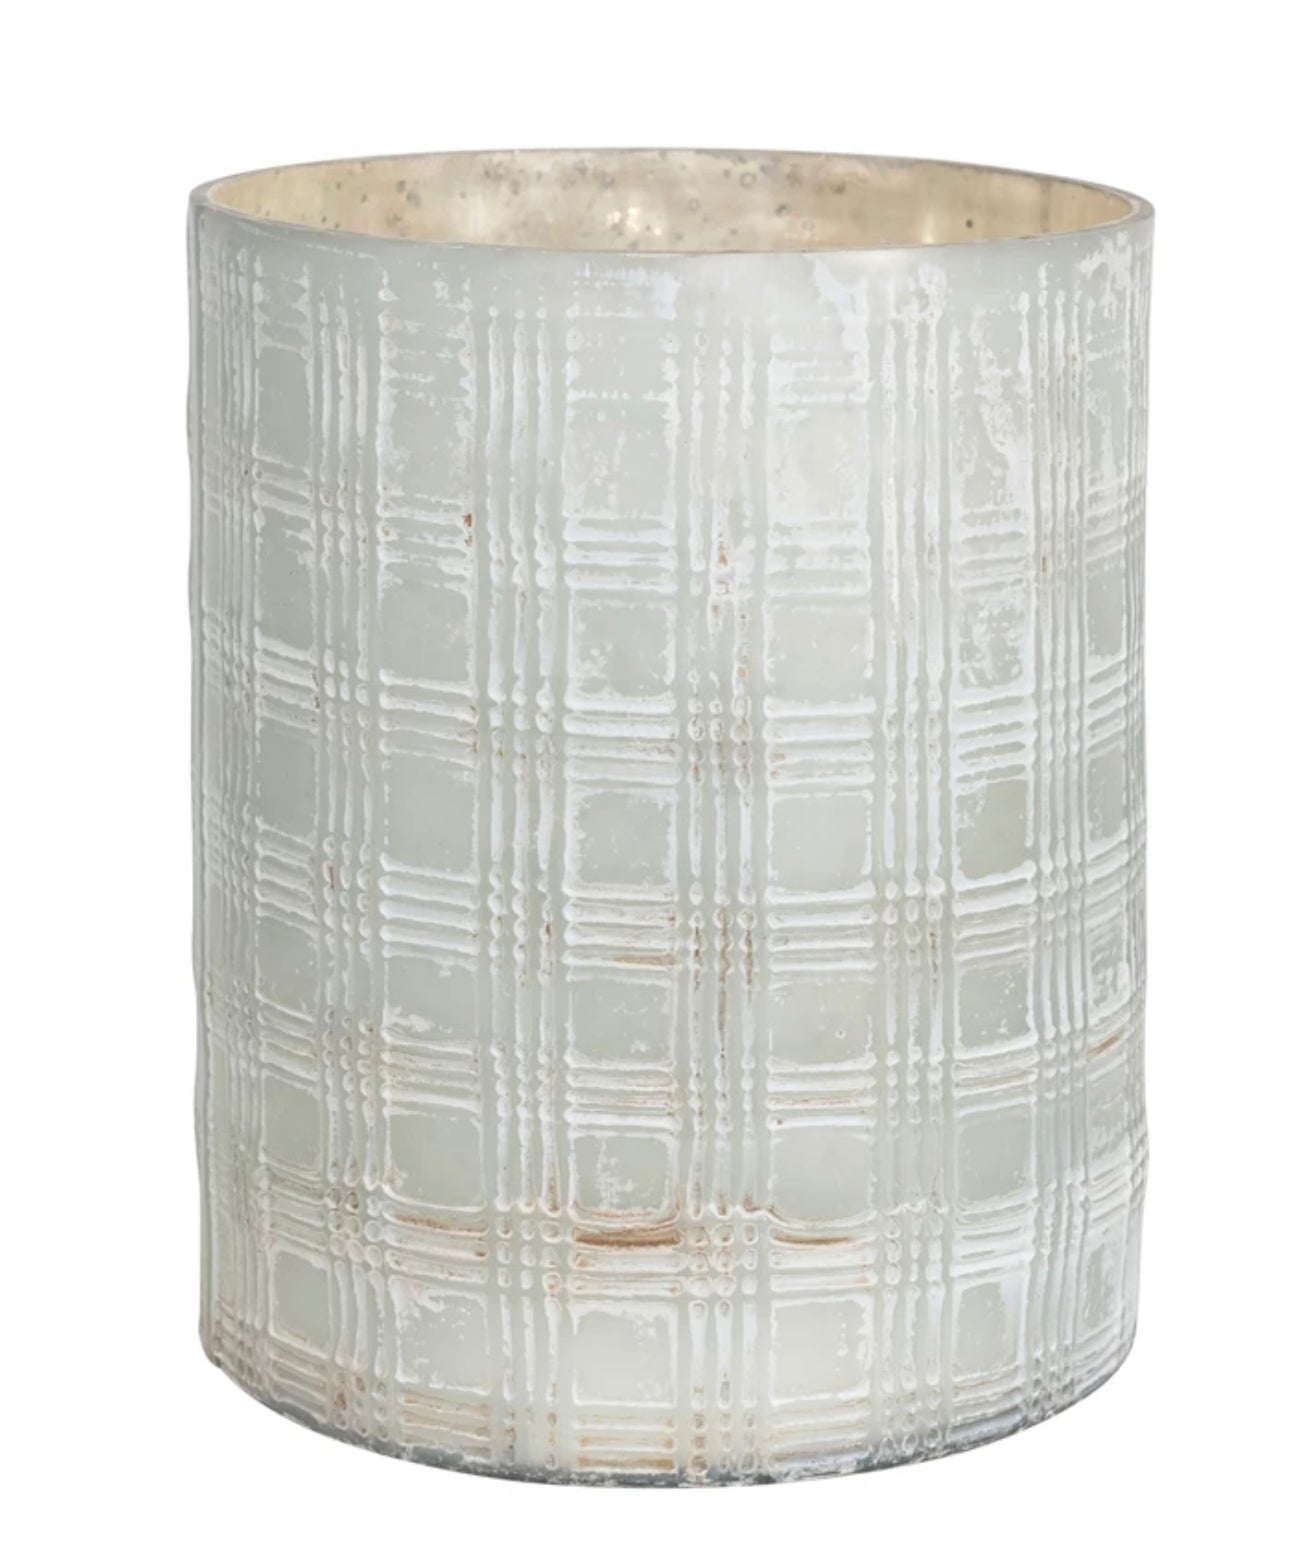 Debossed Mercury Glass Candle Holder with Woven Pattern, Matte White